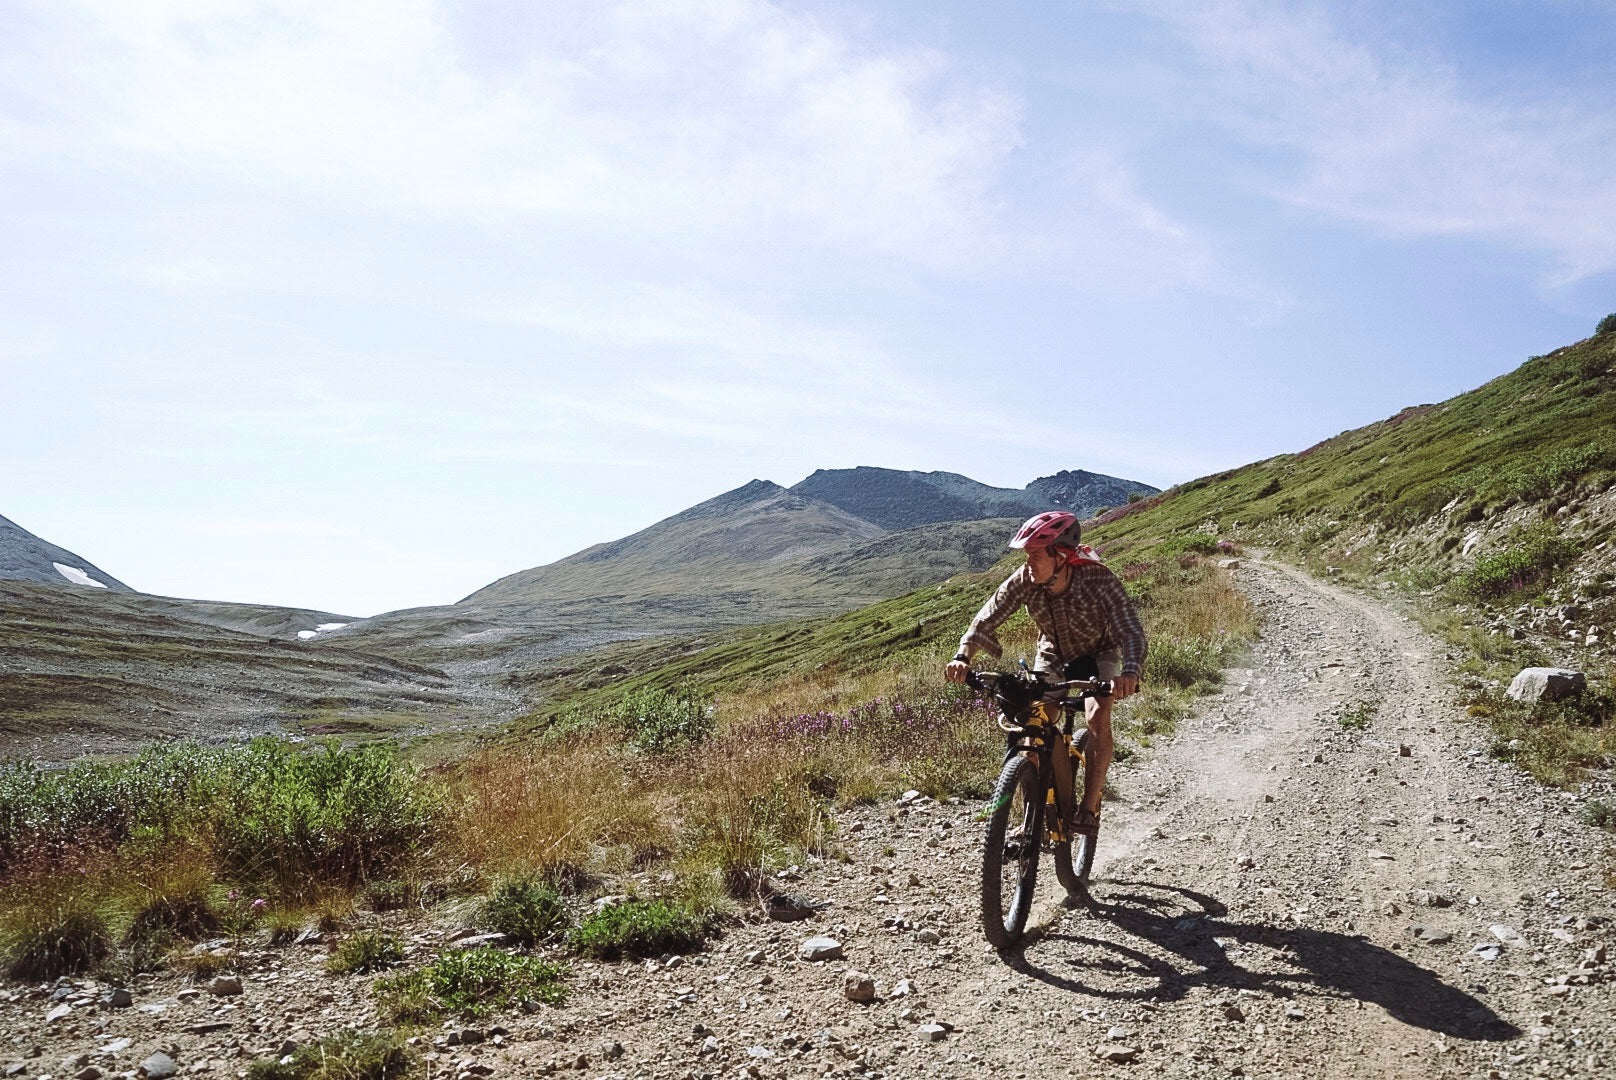 Yukon Dirt: Mines and Mountain Bikes in the Far North